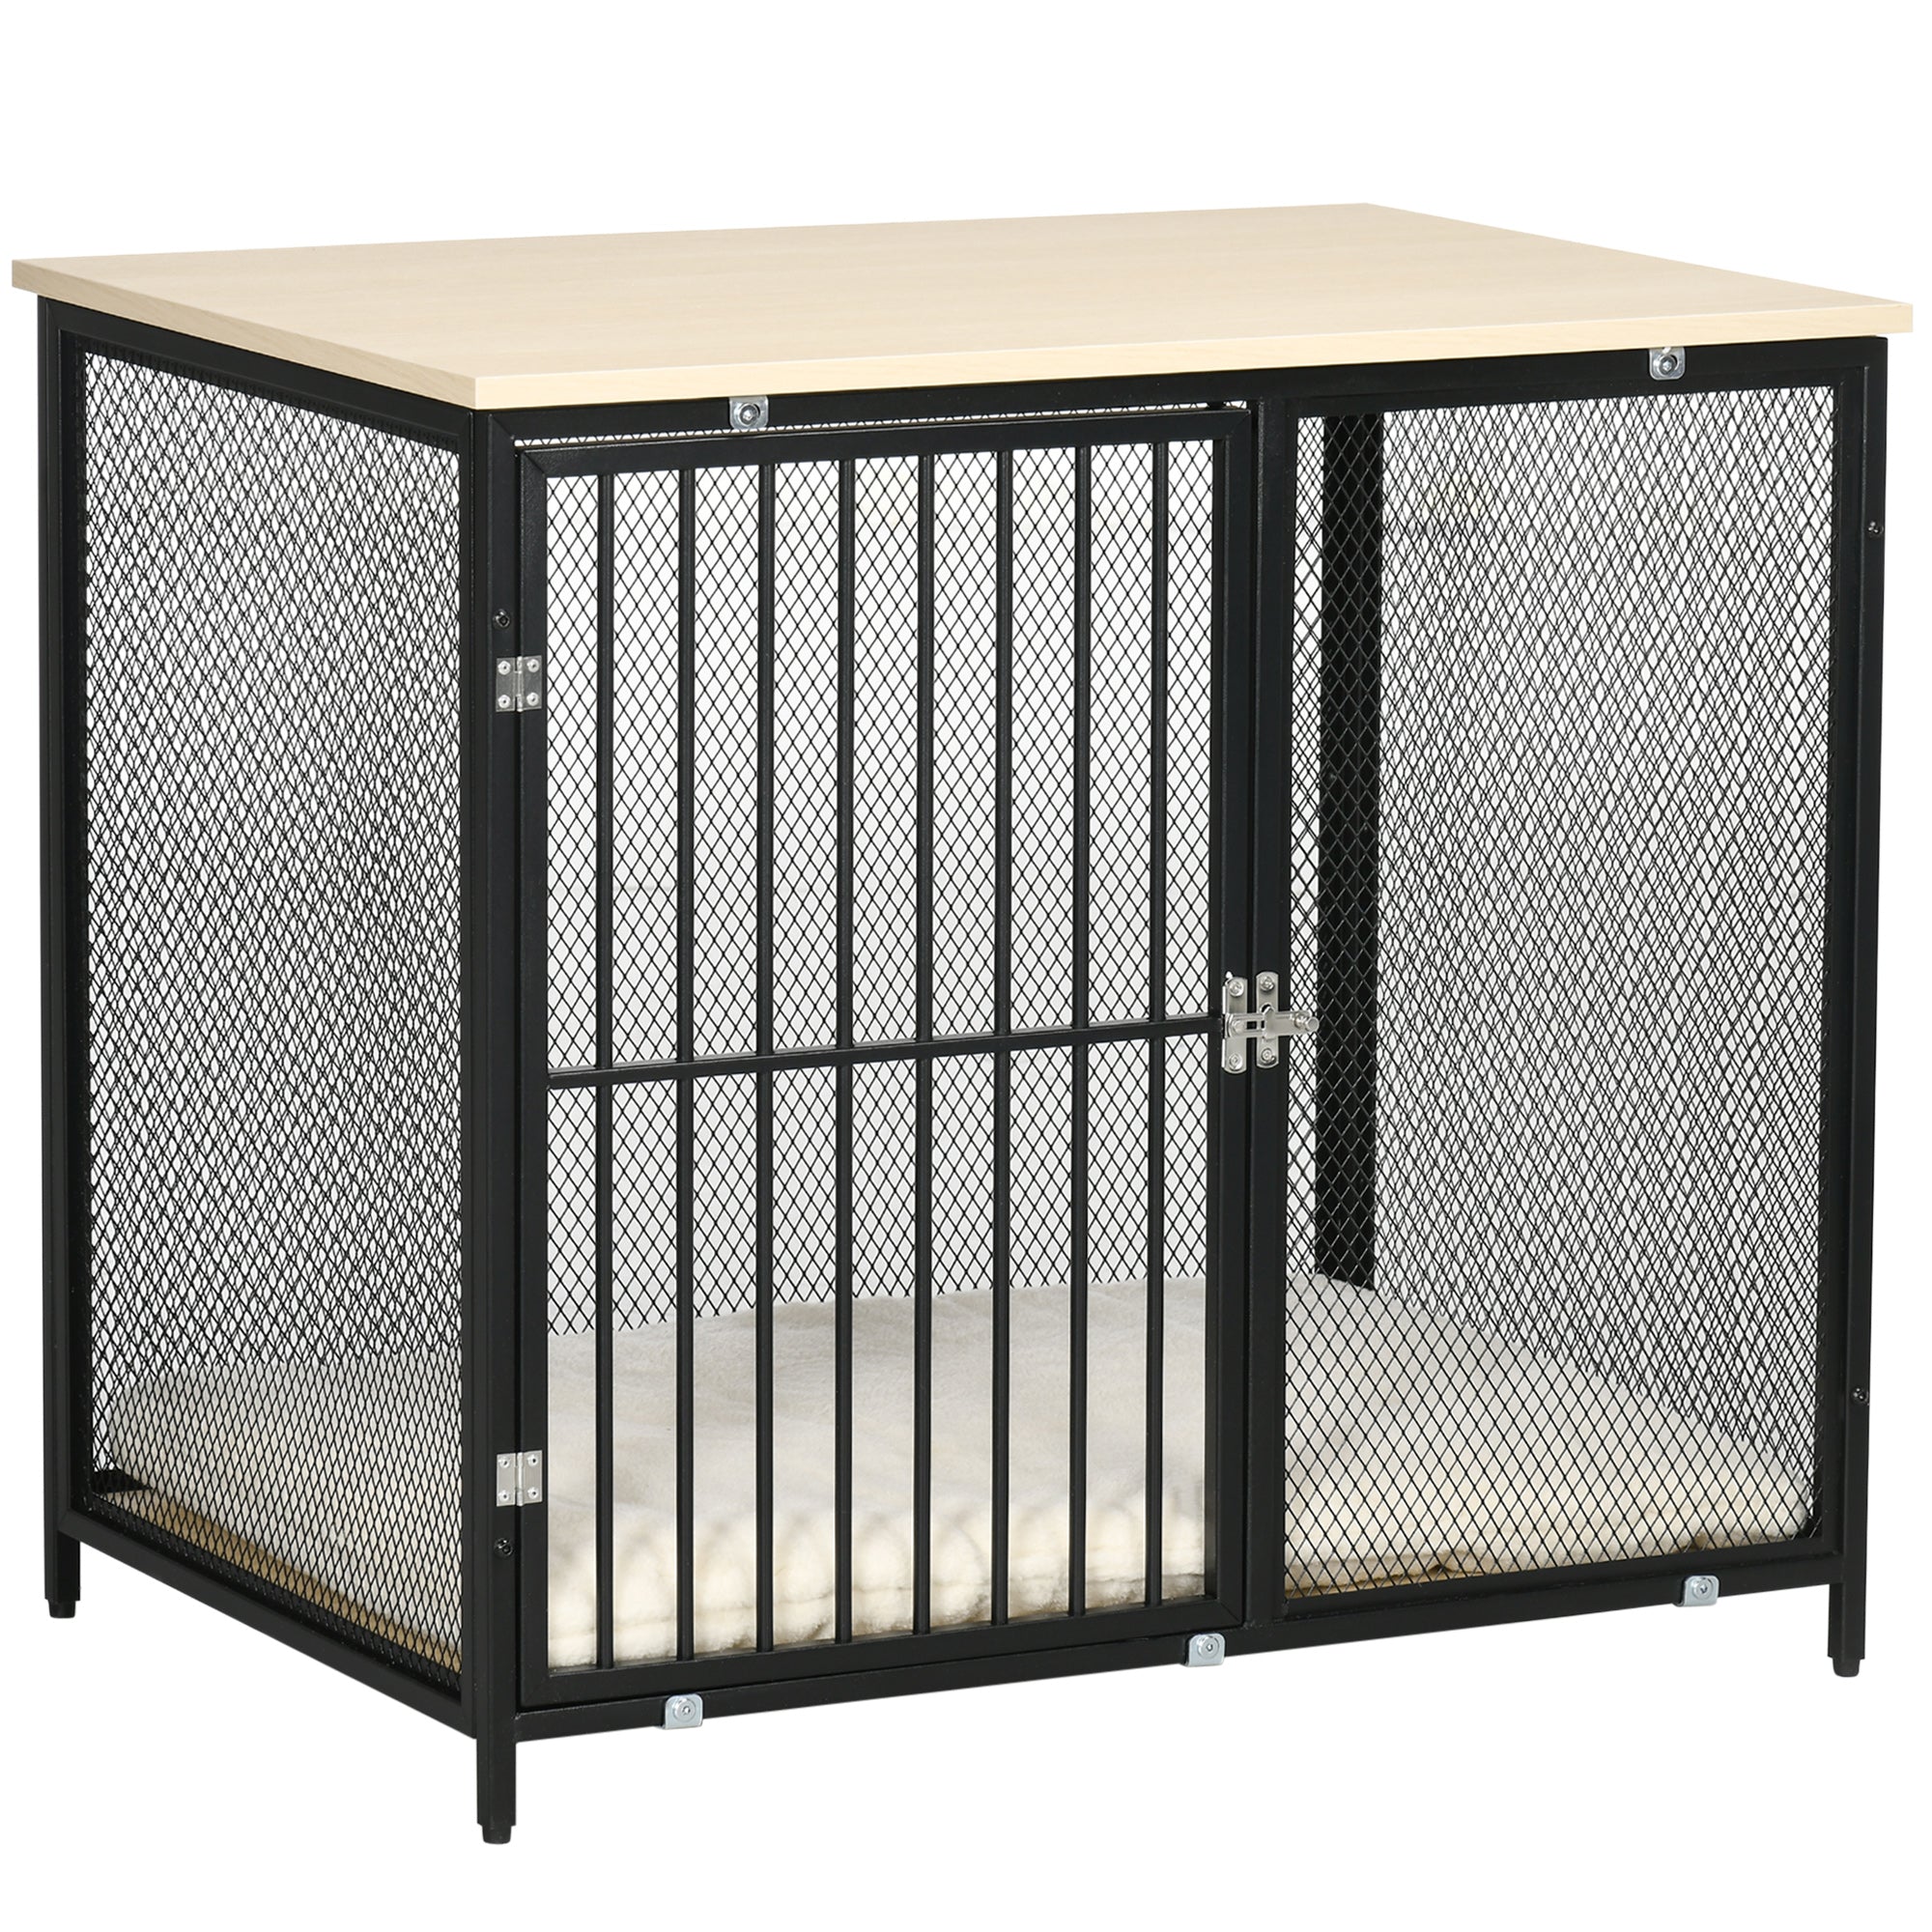 PawHut Dog Crate Furniture w/ Soft Cushion - for Indoor Use - Small - Medium Dogs  | TJ Hughes